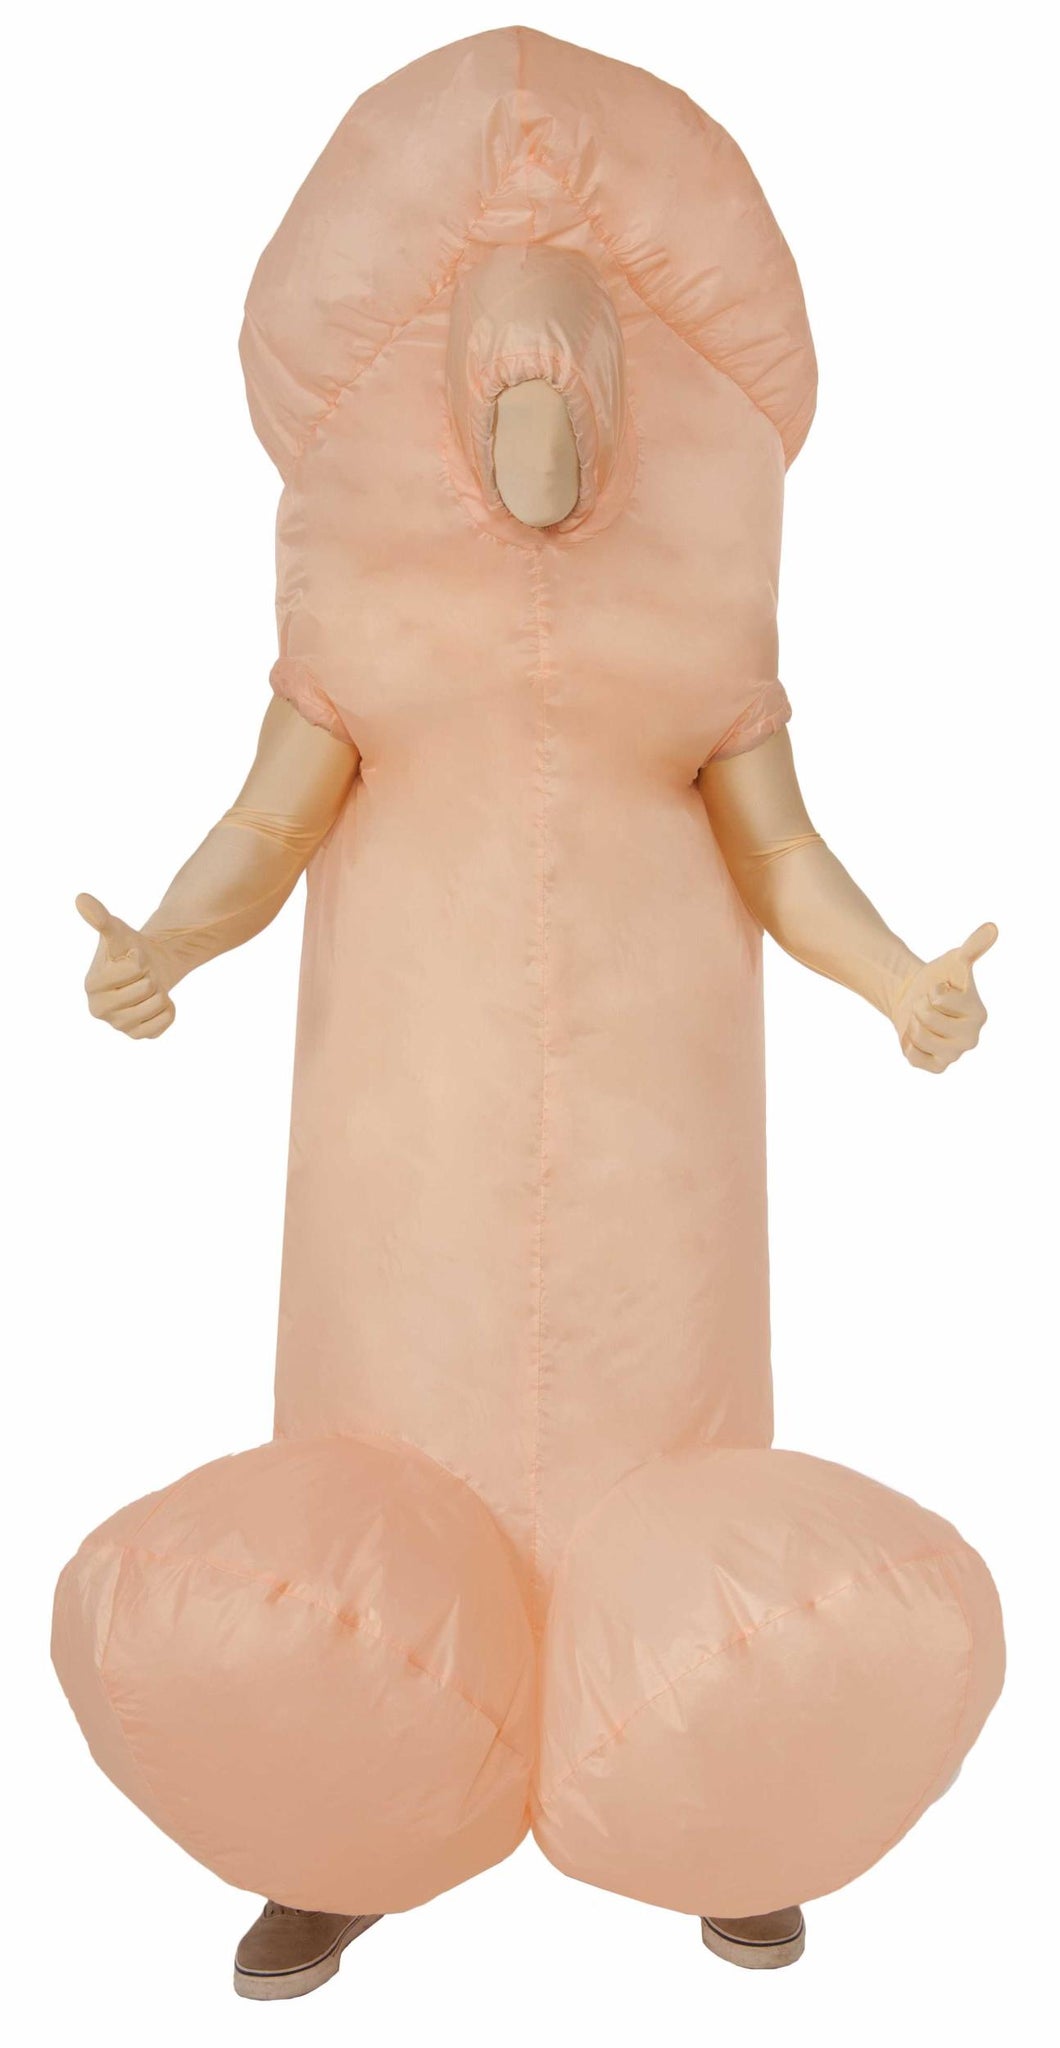 Inflatable Adult Battery Fan Operated Penis Costume